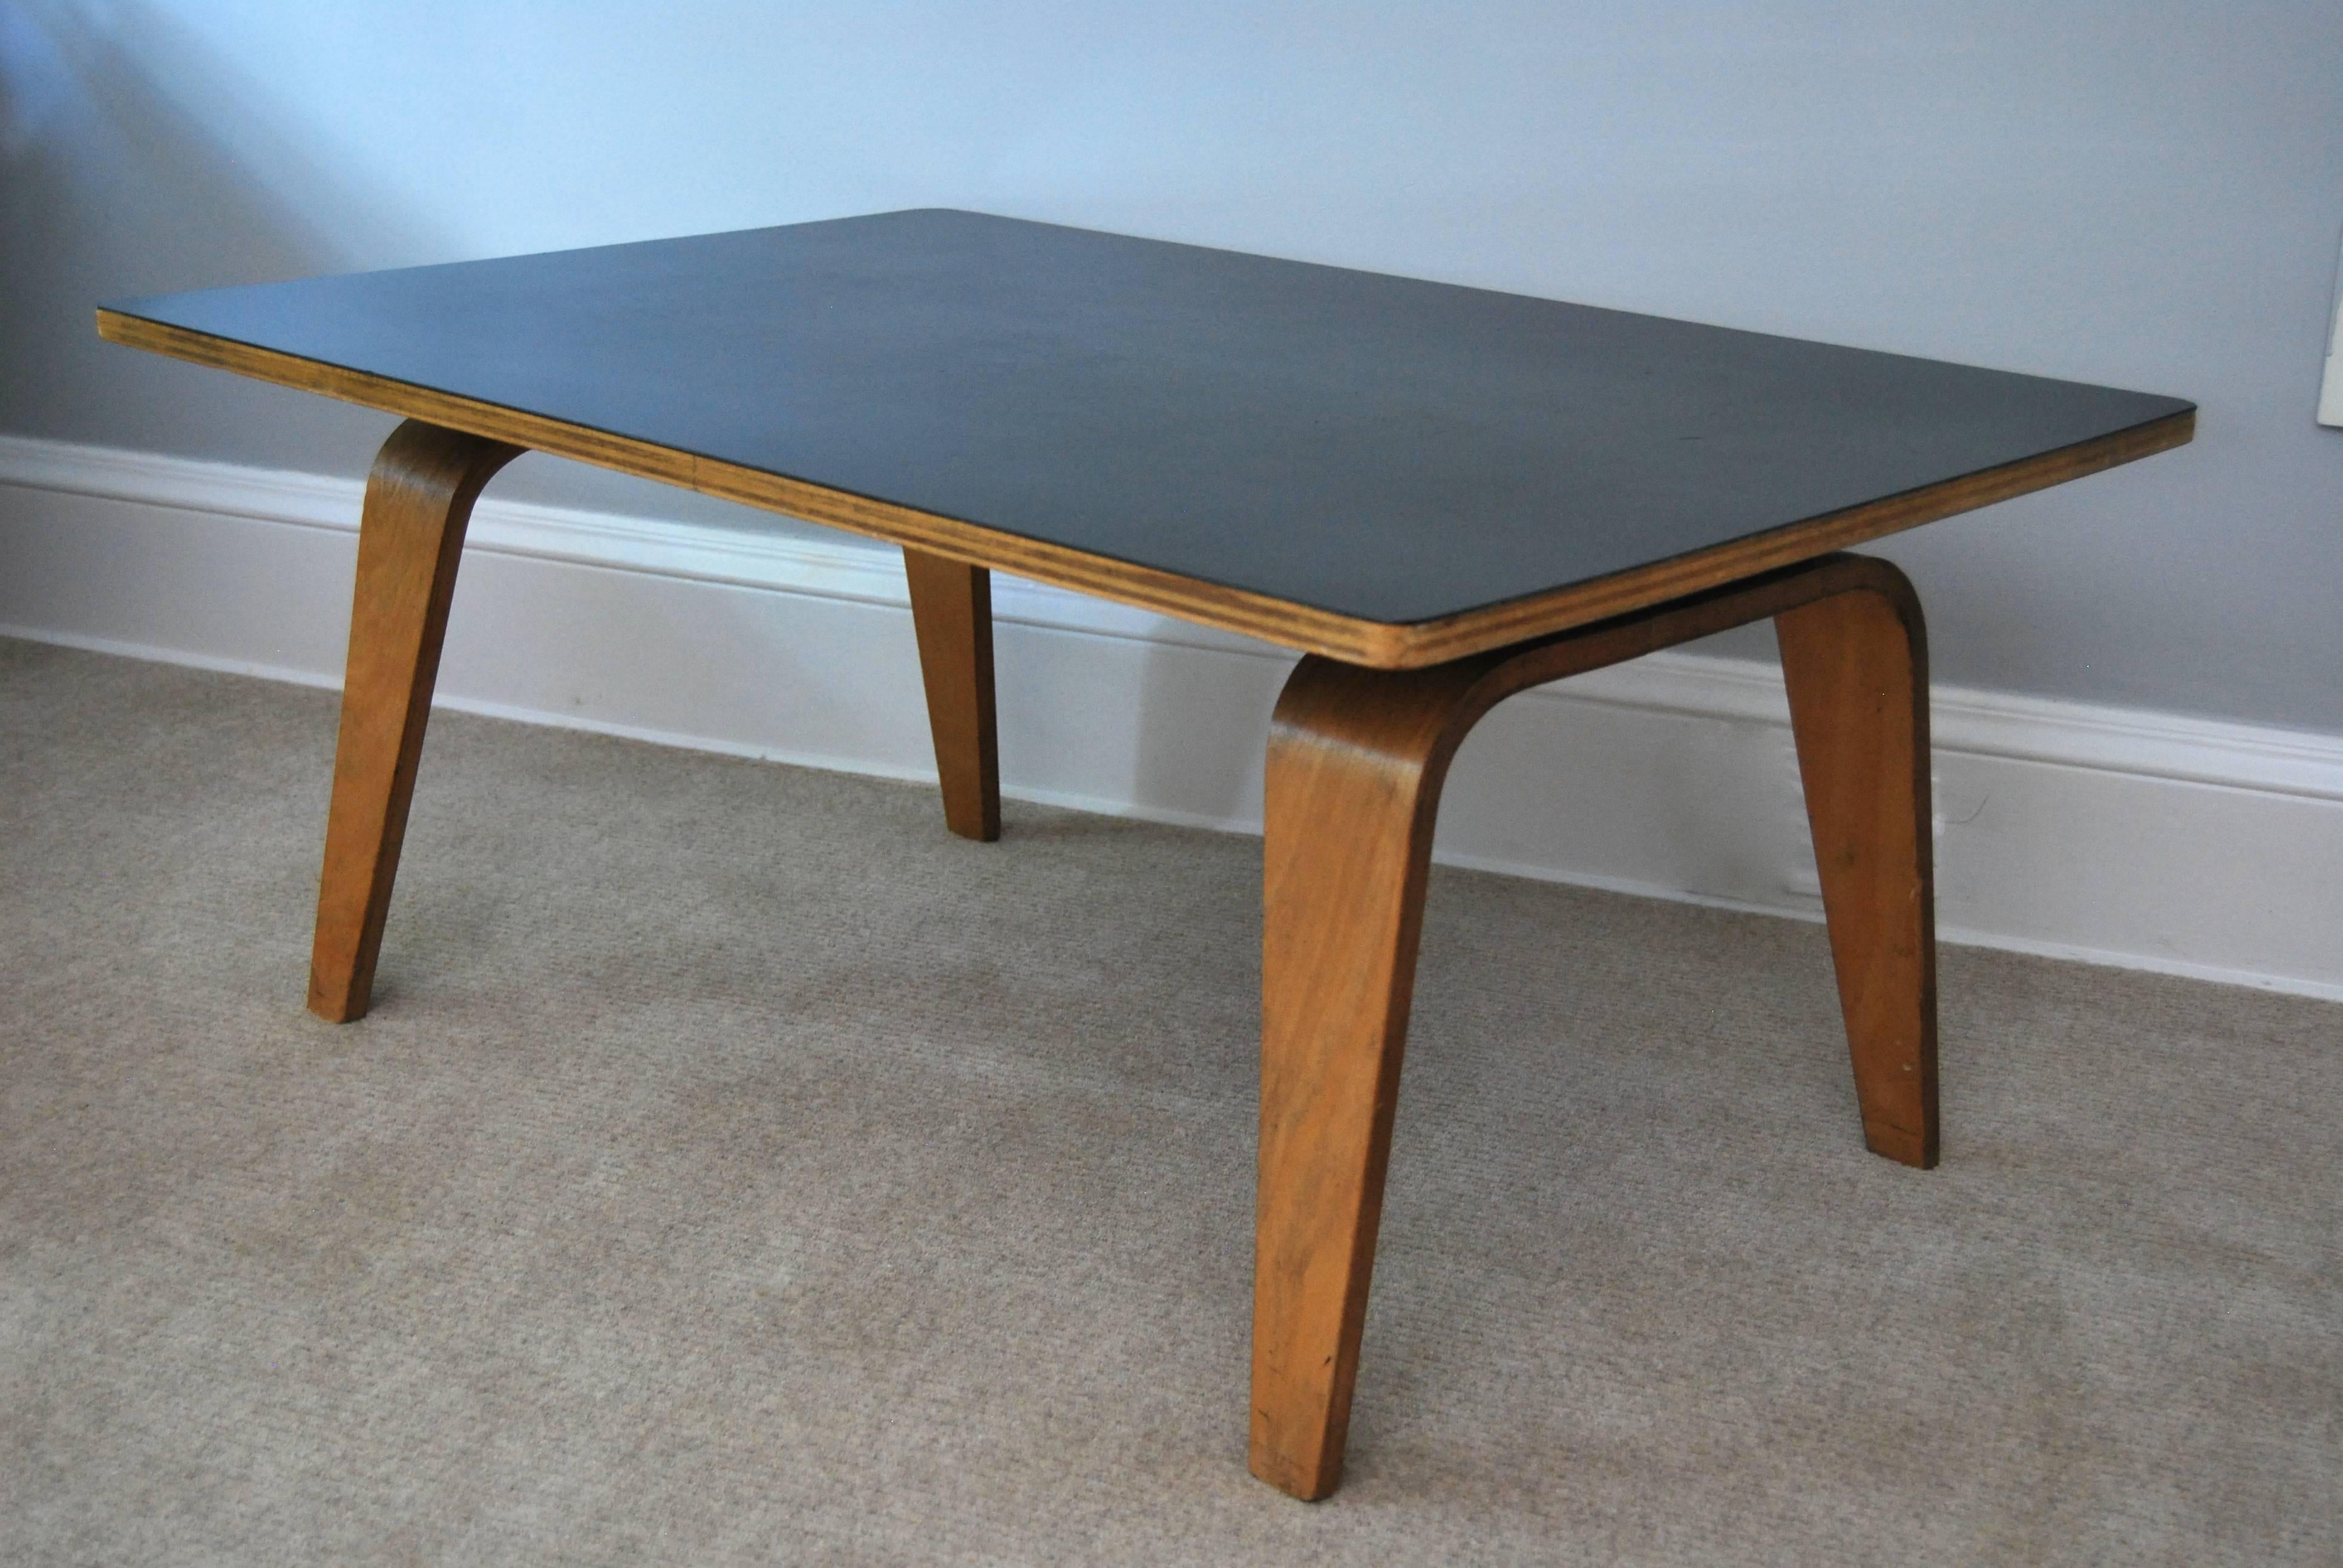 Early Herman Miller production coffee/cocktail table designed by Charles Eames. These were only produced for 4 years, circa 1946.
Beautiful Formica top.

Table is in excellent, original condition.
Please let me know if you need additional photos.